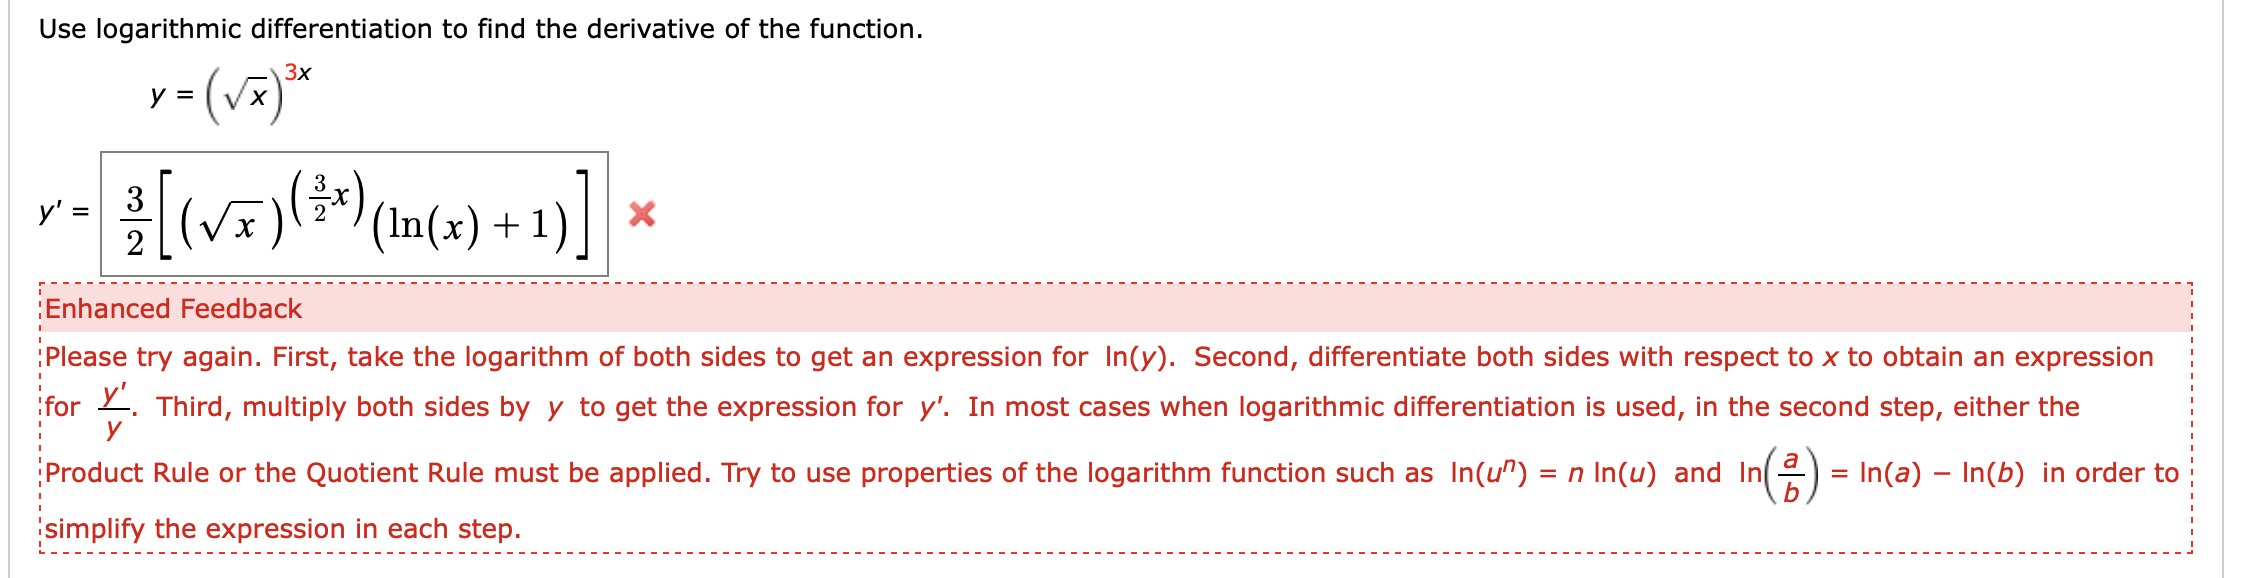 Use logarithmic differentiation to find the derivative of the function
y (v
Зx
Vx
3
(V)
у' -
2
X
'(In(x) 1
Enhanced Feedback
Please try again. First, take the logarithm of both sides to get an expression for In(y). Second, differentiate both sides with respect to x to obtain an expression
for Third, multiply both sides byy to get the expression for y'. In most cases when logarithmic differentiation is used, in the second step, either the
у
Product Rule or the Quotient Rule must be applied. Try to use properties of the logarithm function such as In(u")
n In(u) and In
= In(a) In(b) in order to
simplify the expression in each step.
